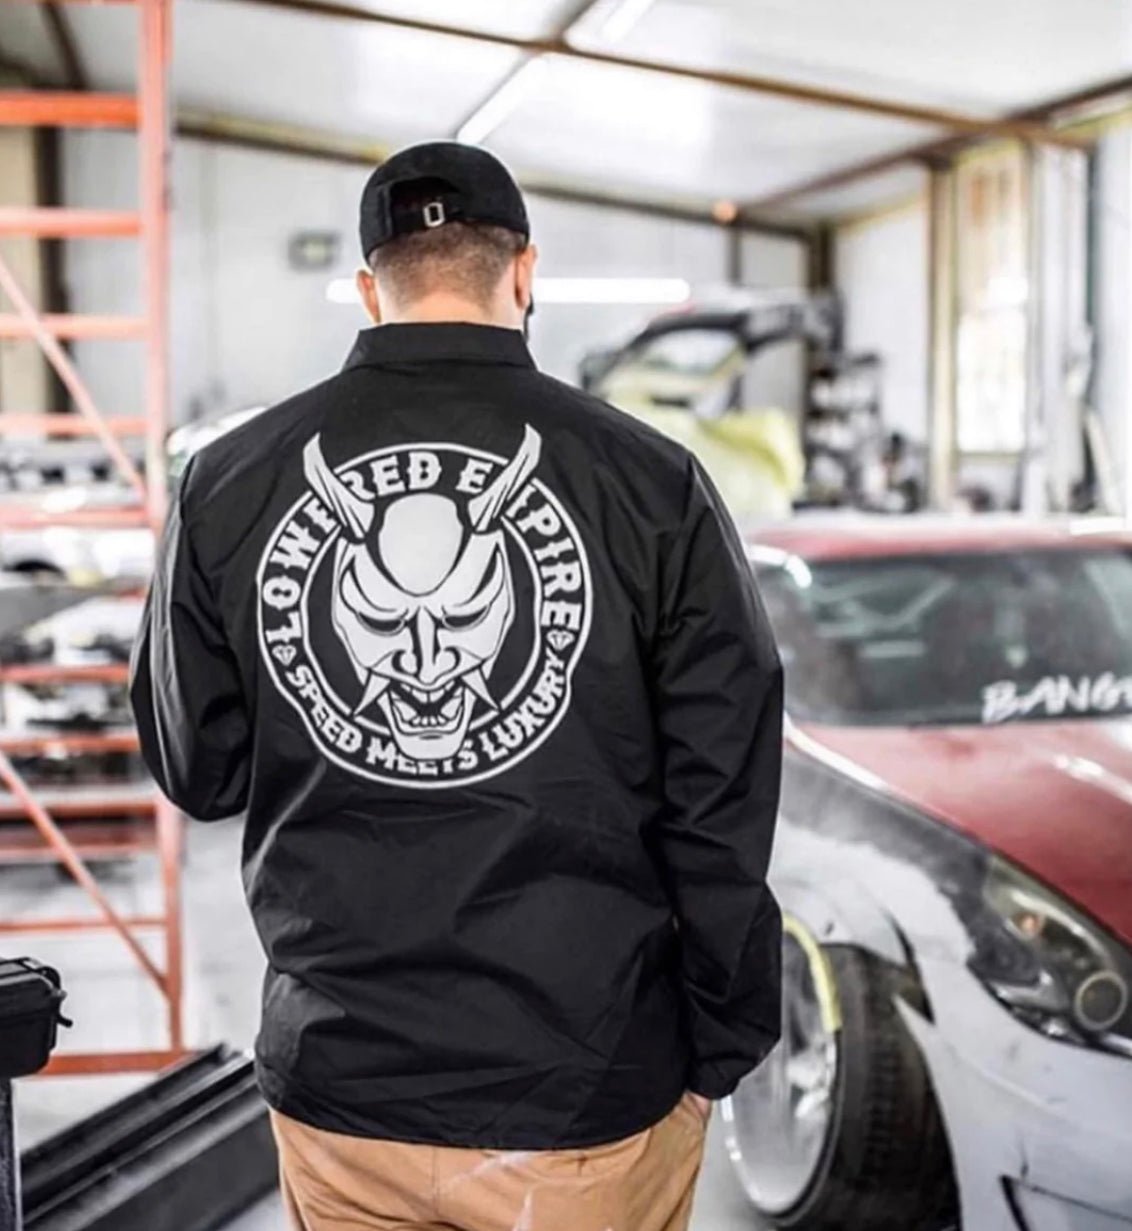 Official Lowered Empire Premium Coach Jacket - Loweredempire